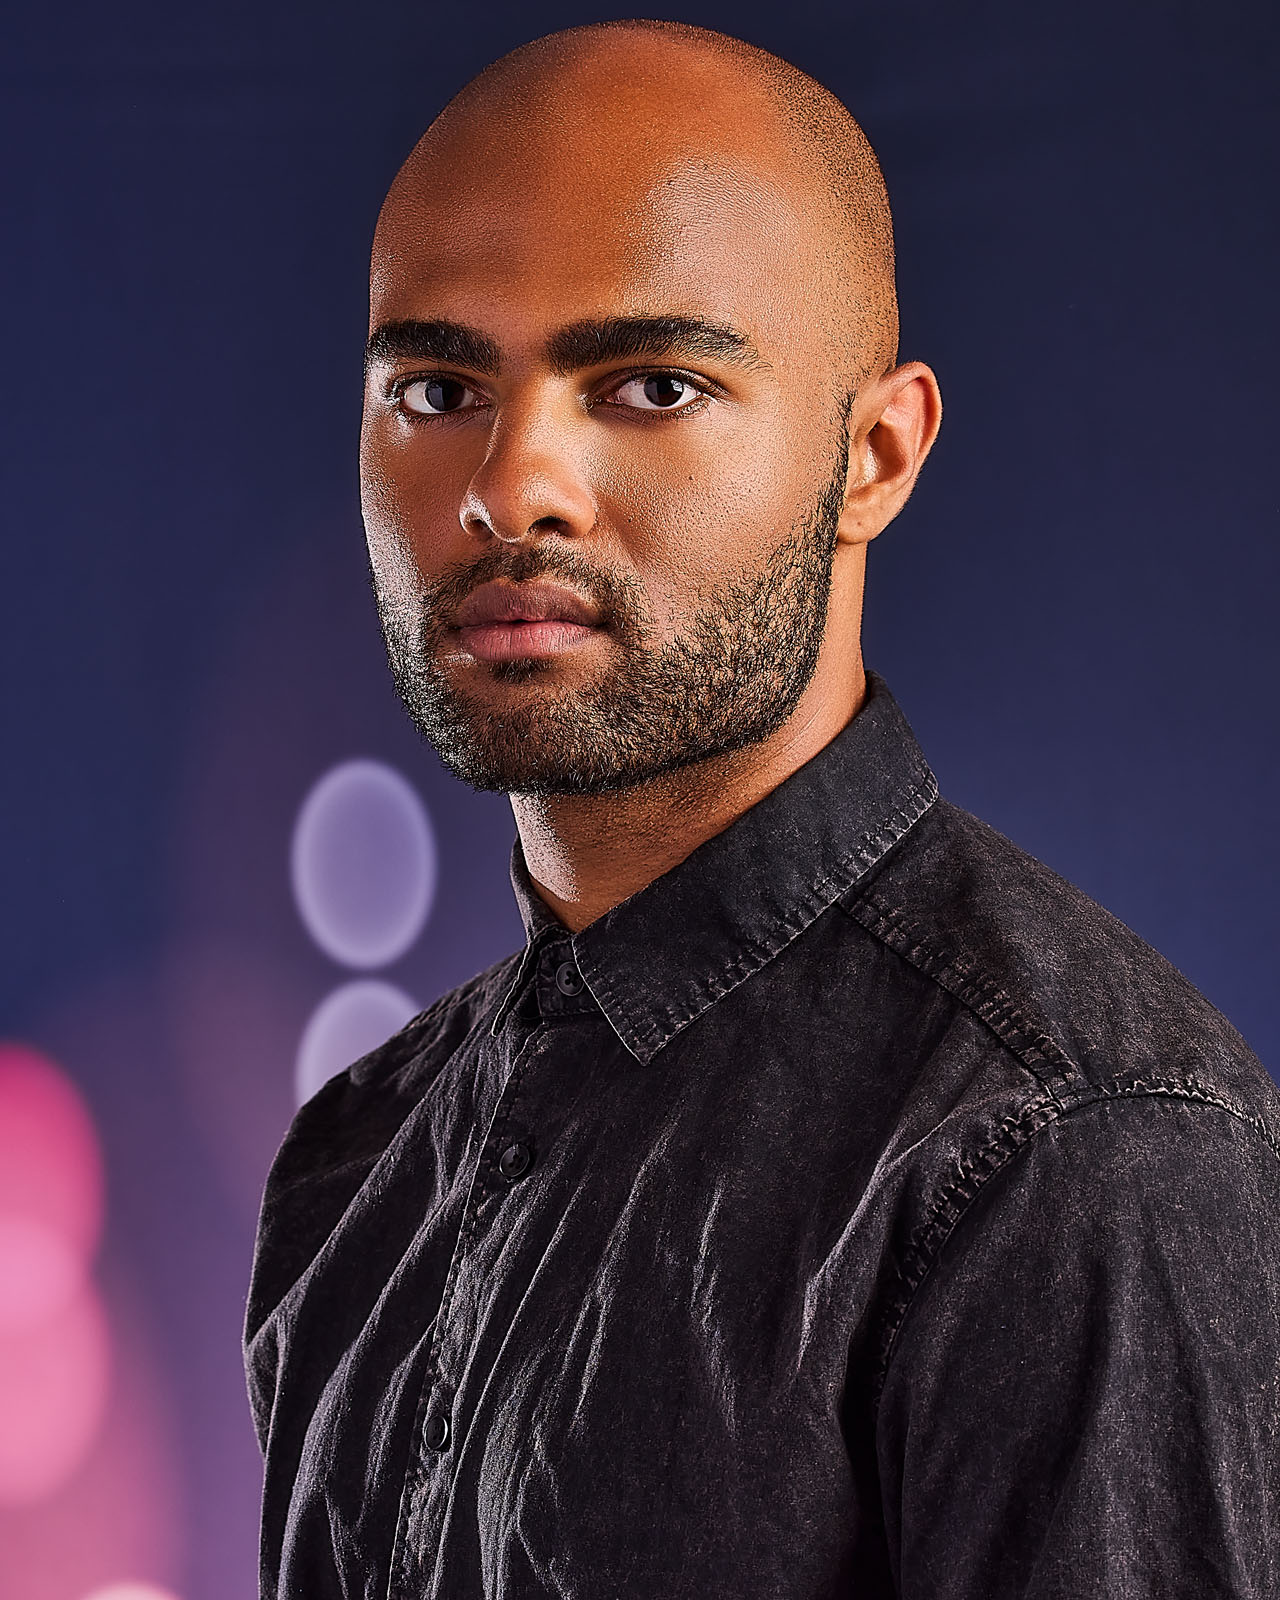 theatrical headshot for men los angeles